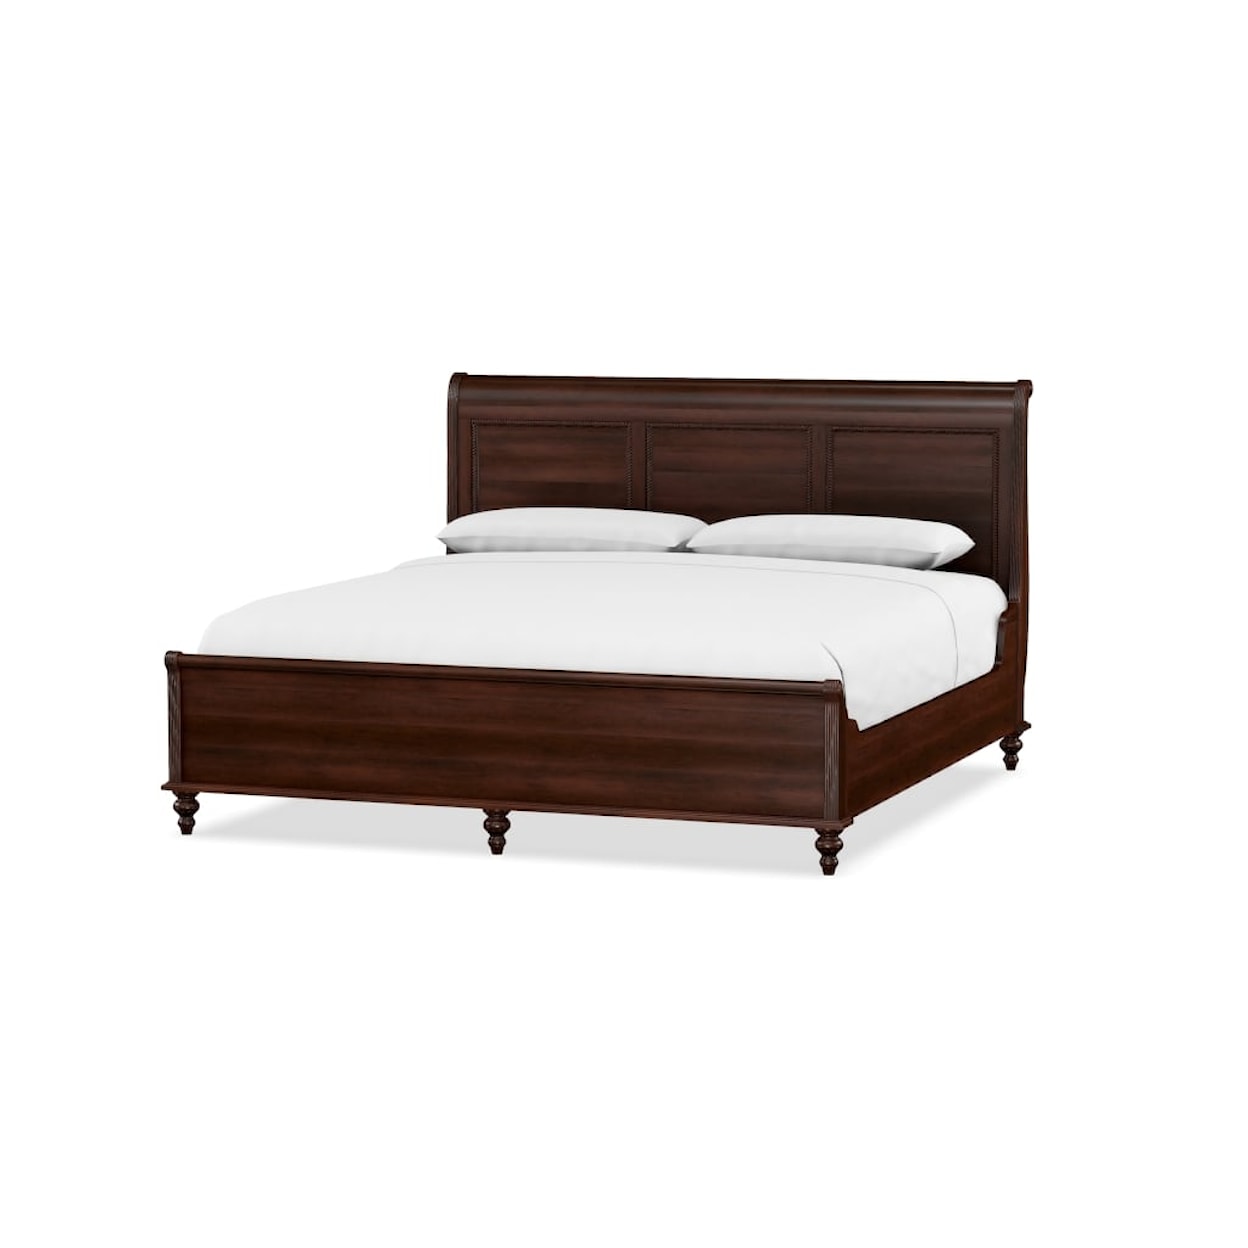 Durham Savile Row King Sleigh Bed with Low Footboard